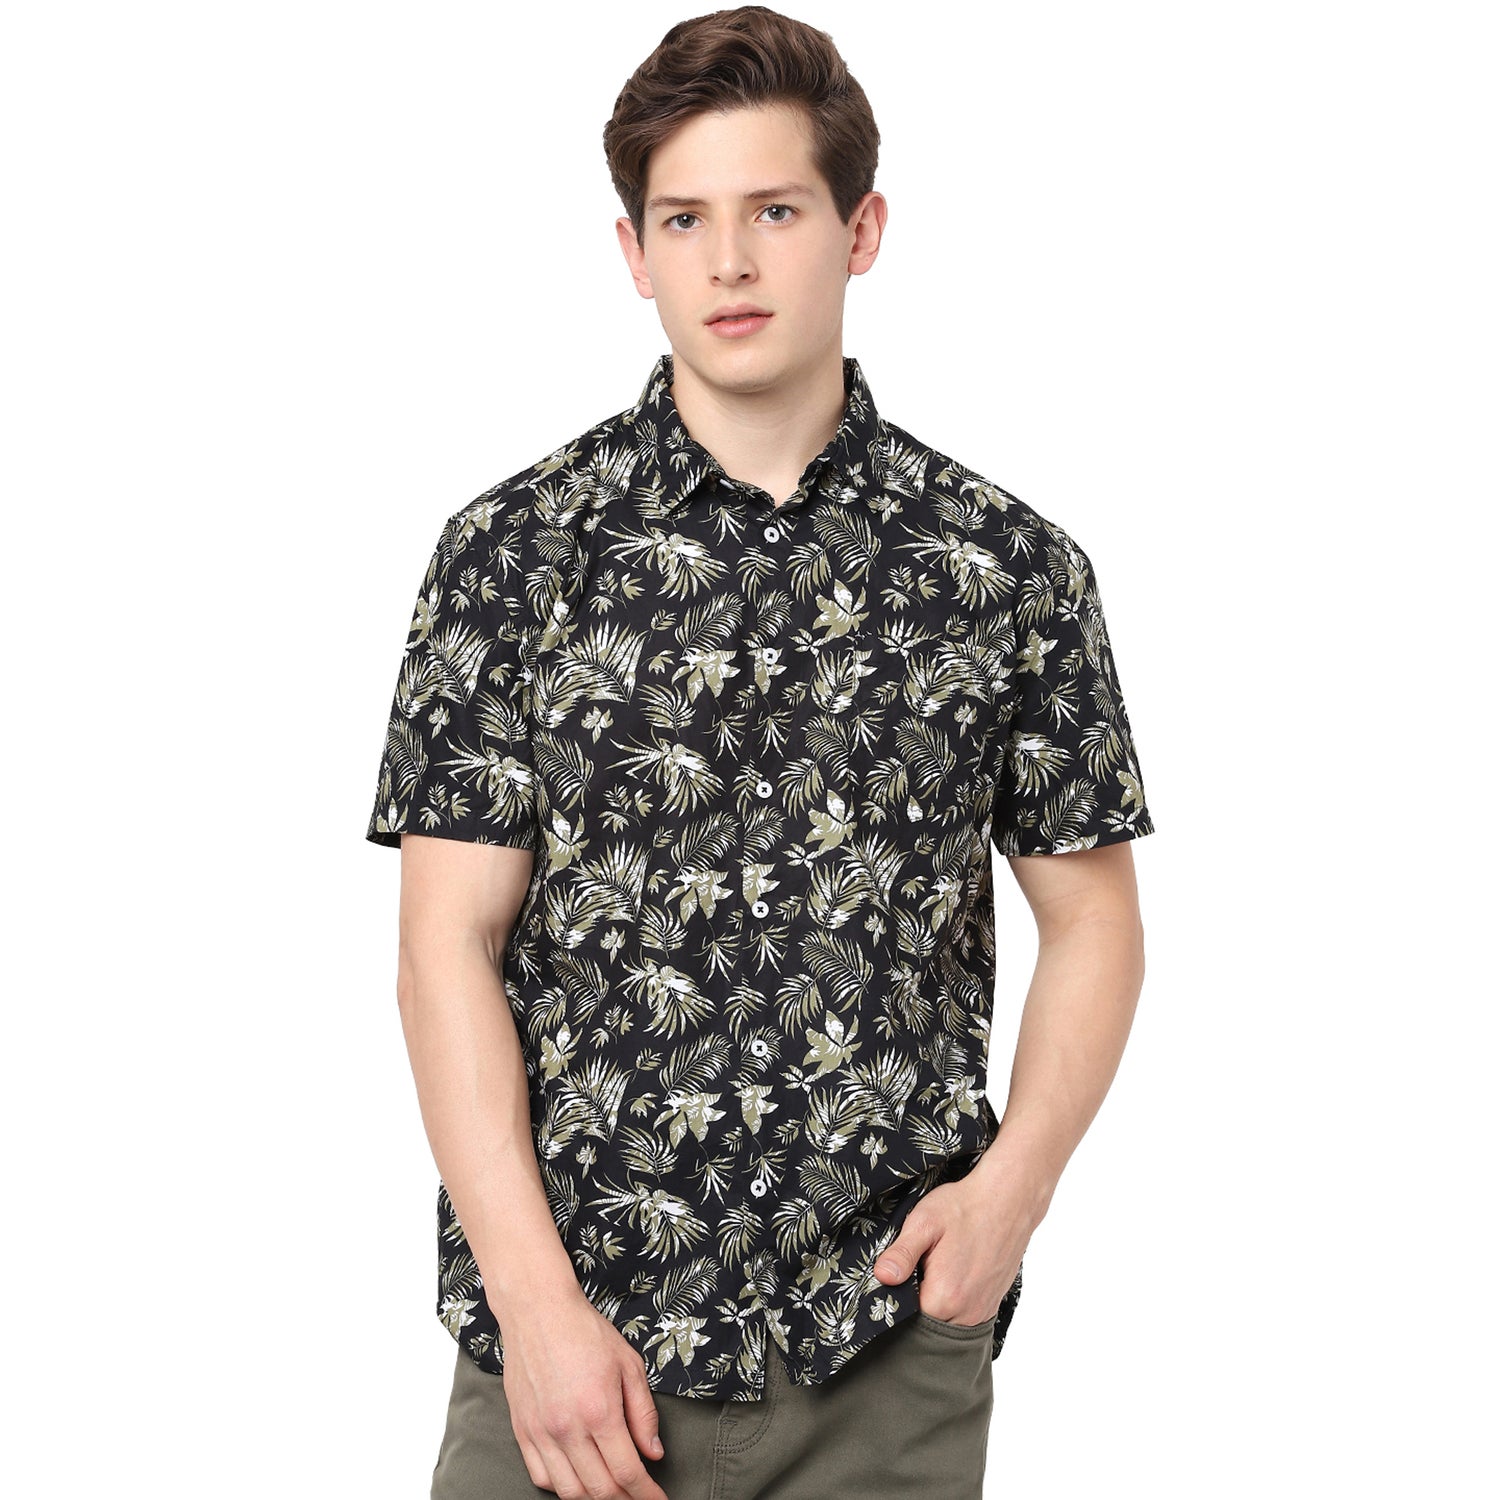 Olive Green and Black Slim Fit Printed Cotton Casual Shirt (VAPALM1)